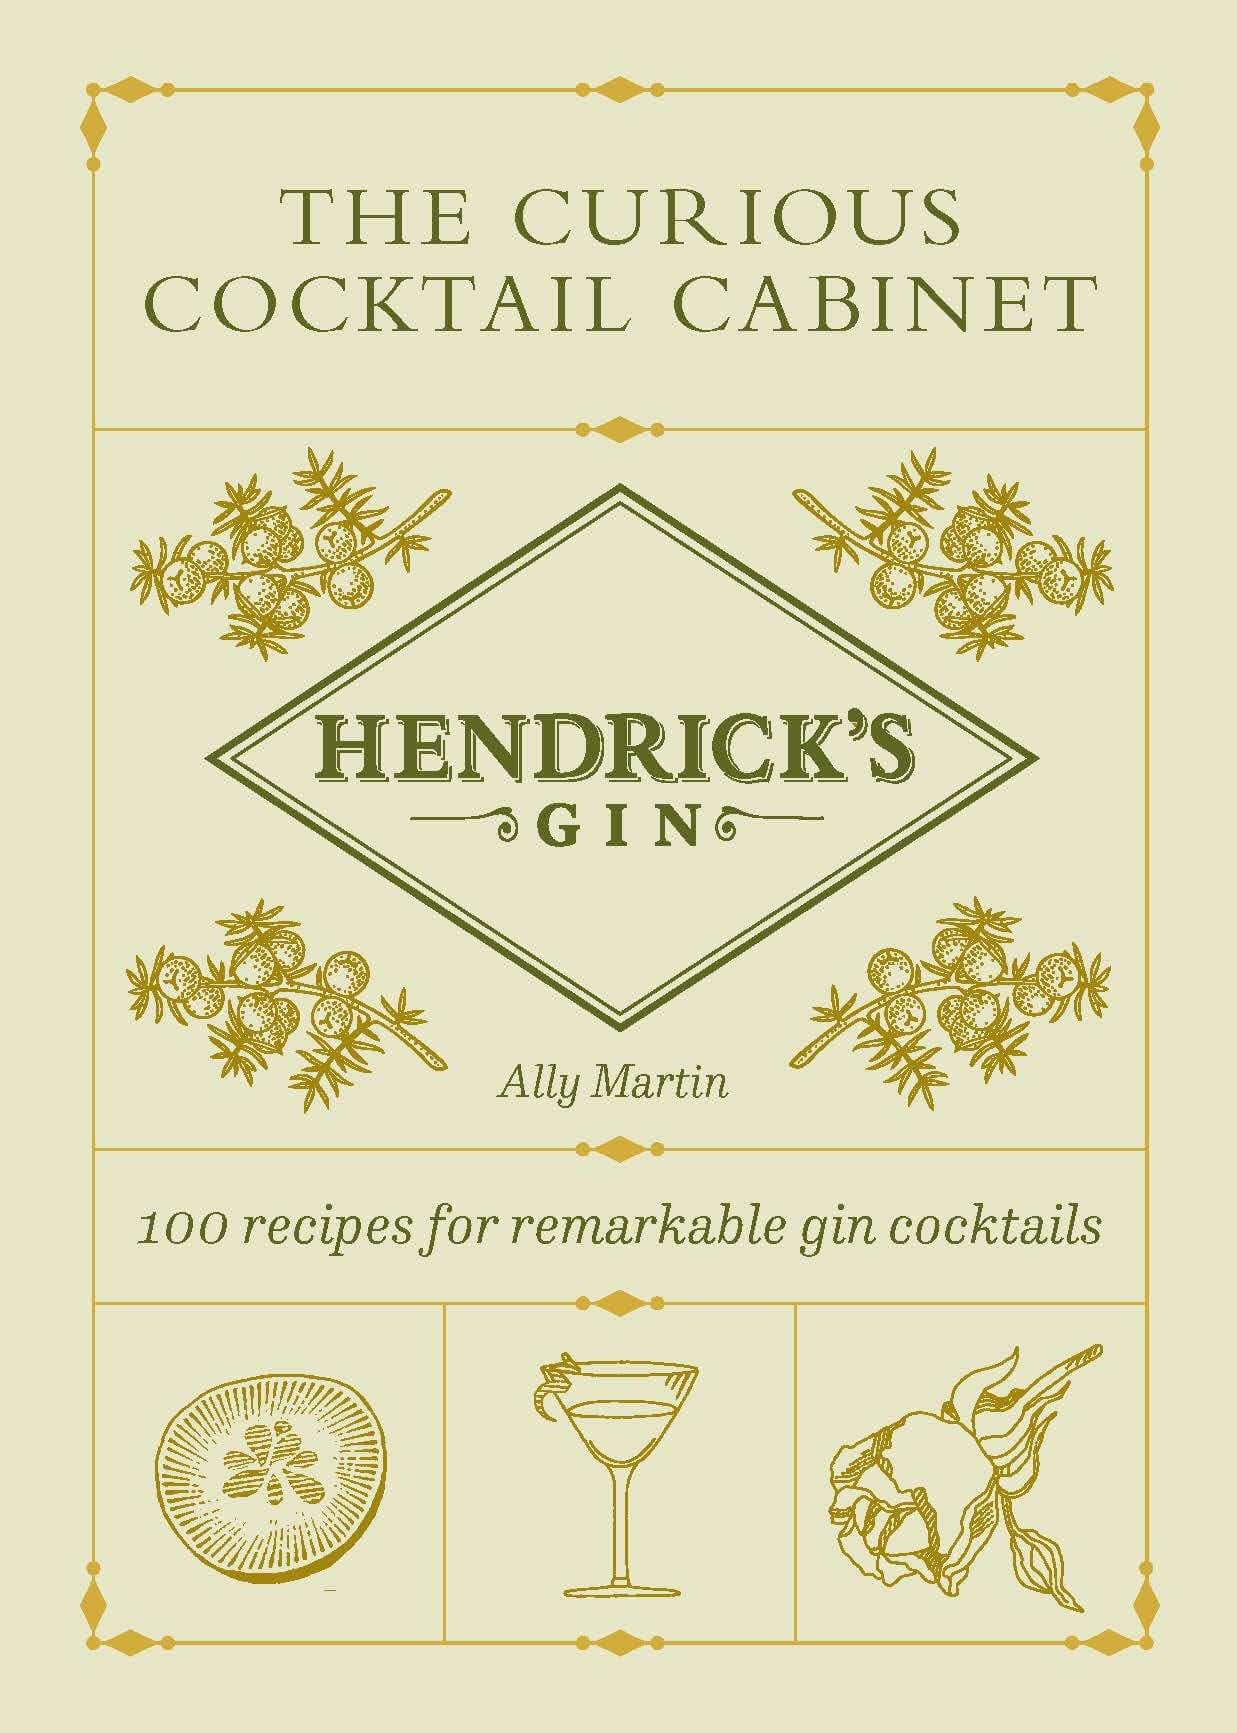 The Curious Cocktail Cabinet | Hendrick's Gin | Recipe Book - Lifestory